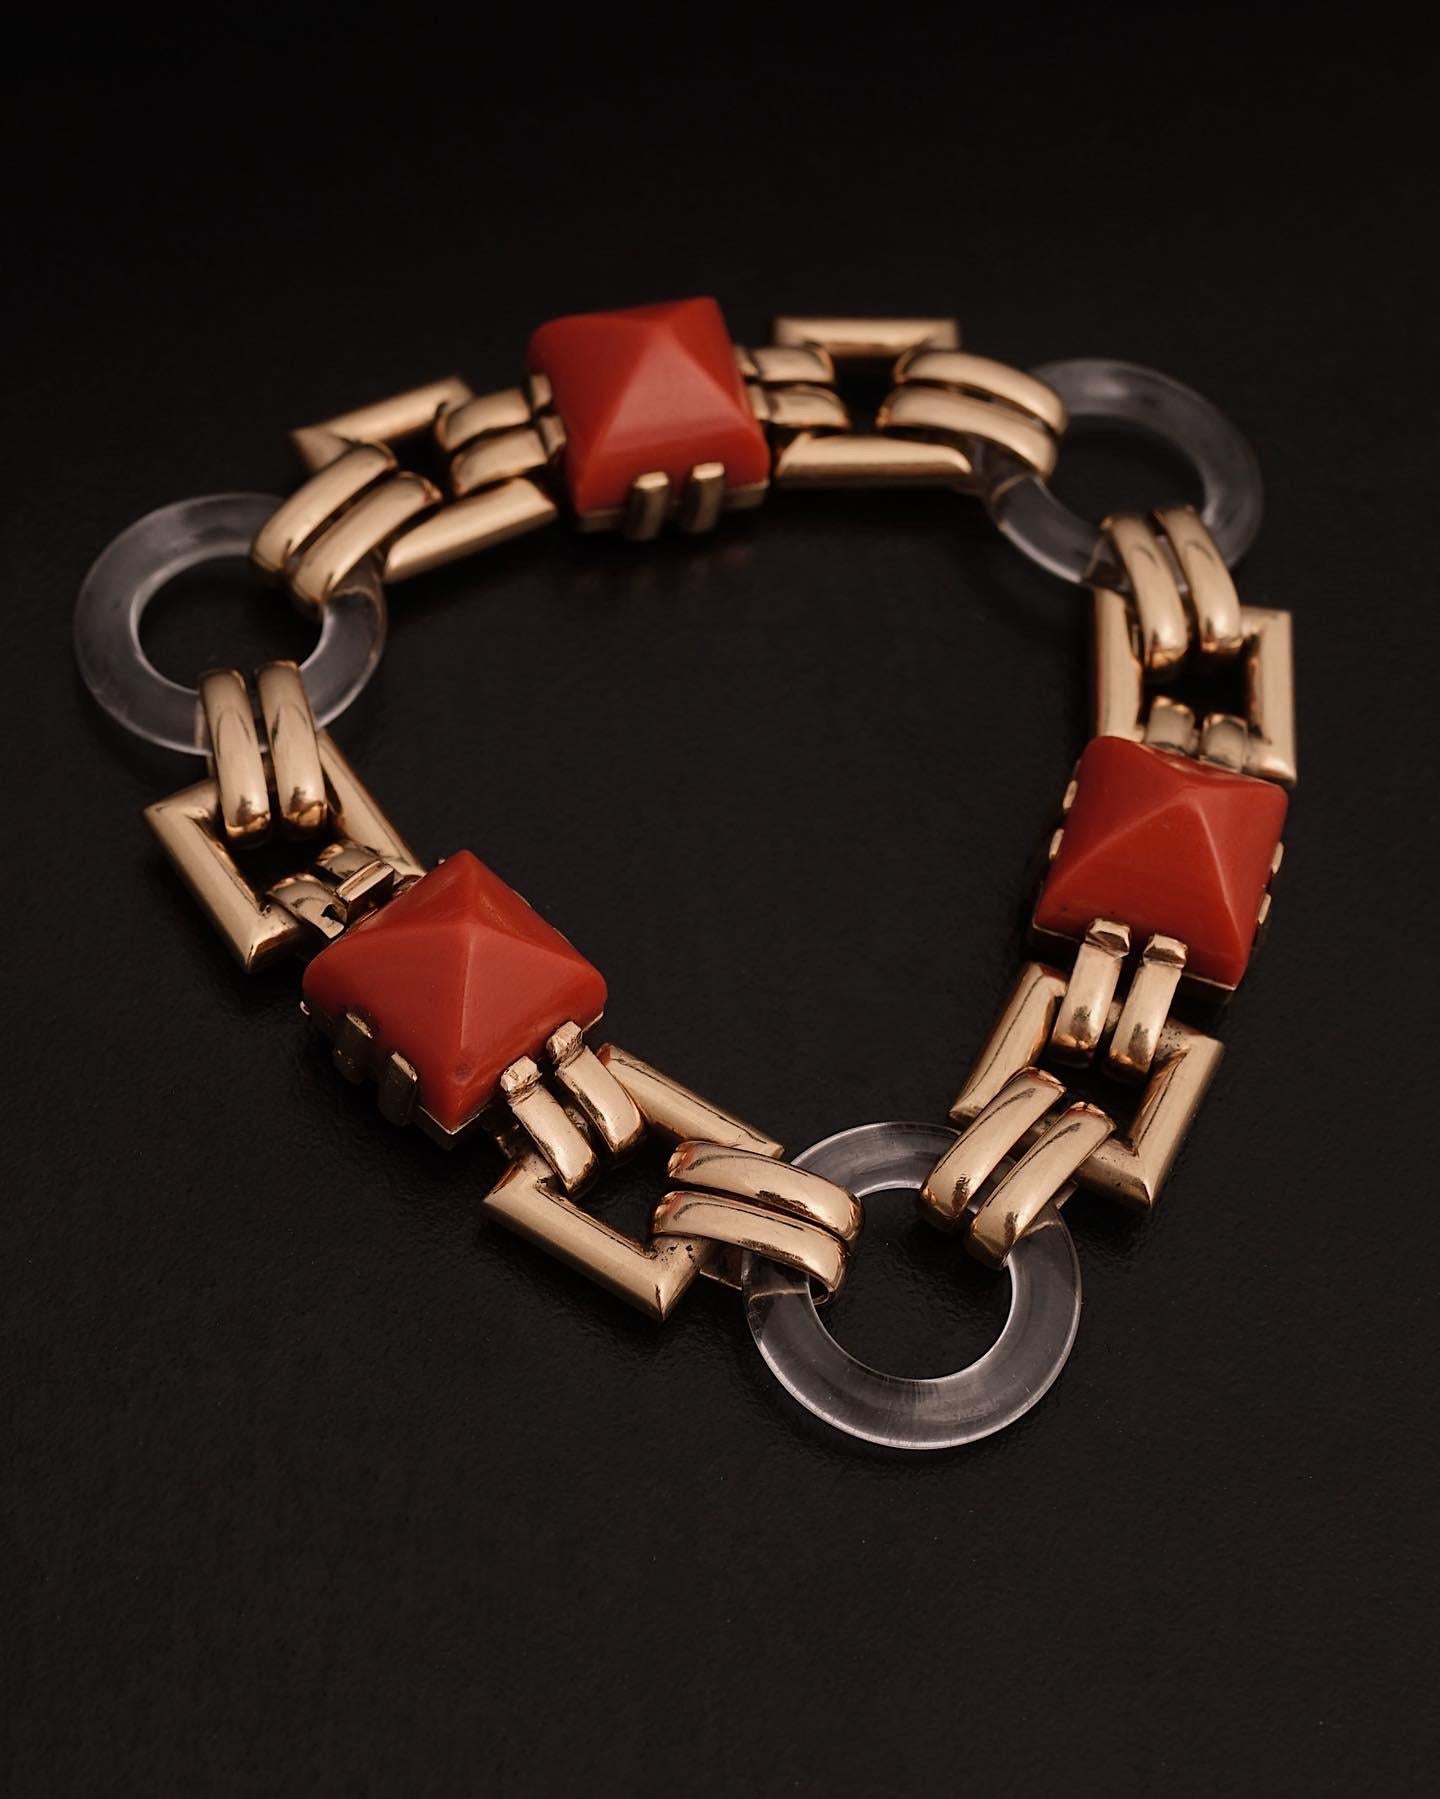 Cartier, Paris
Stunning 18k Gold, Coral and Rock Cristal, Circa 1926
Three coral stones and three round pieces of rock crystal, linked by gold chains. 
Signed Cartier and numbered.
Length 19 cm, gross weight 40 grams.

Very Rare drawing by the